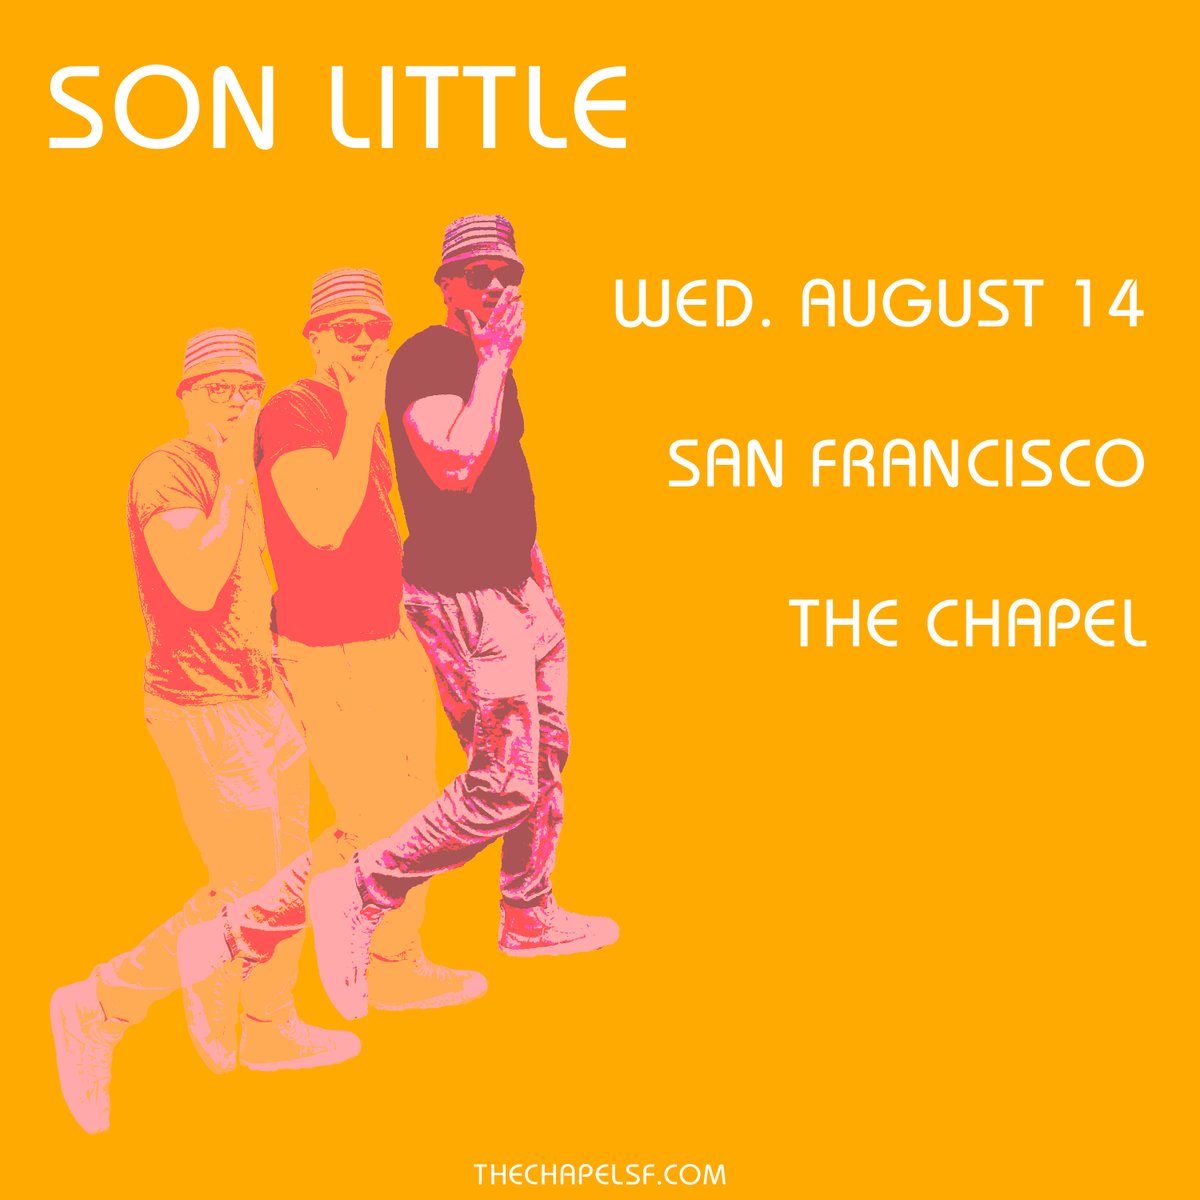 Tickets for Son Little on Wednesday, August 14 are on sale now! 🎟️: tinyurl.com/mryt932c